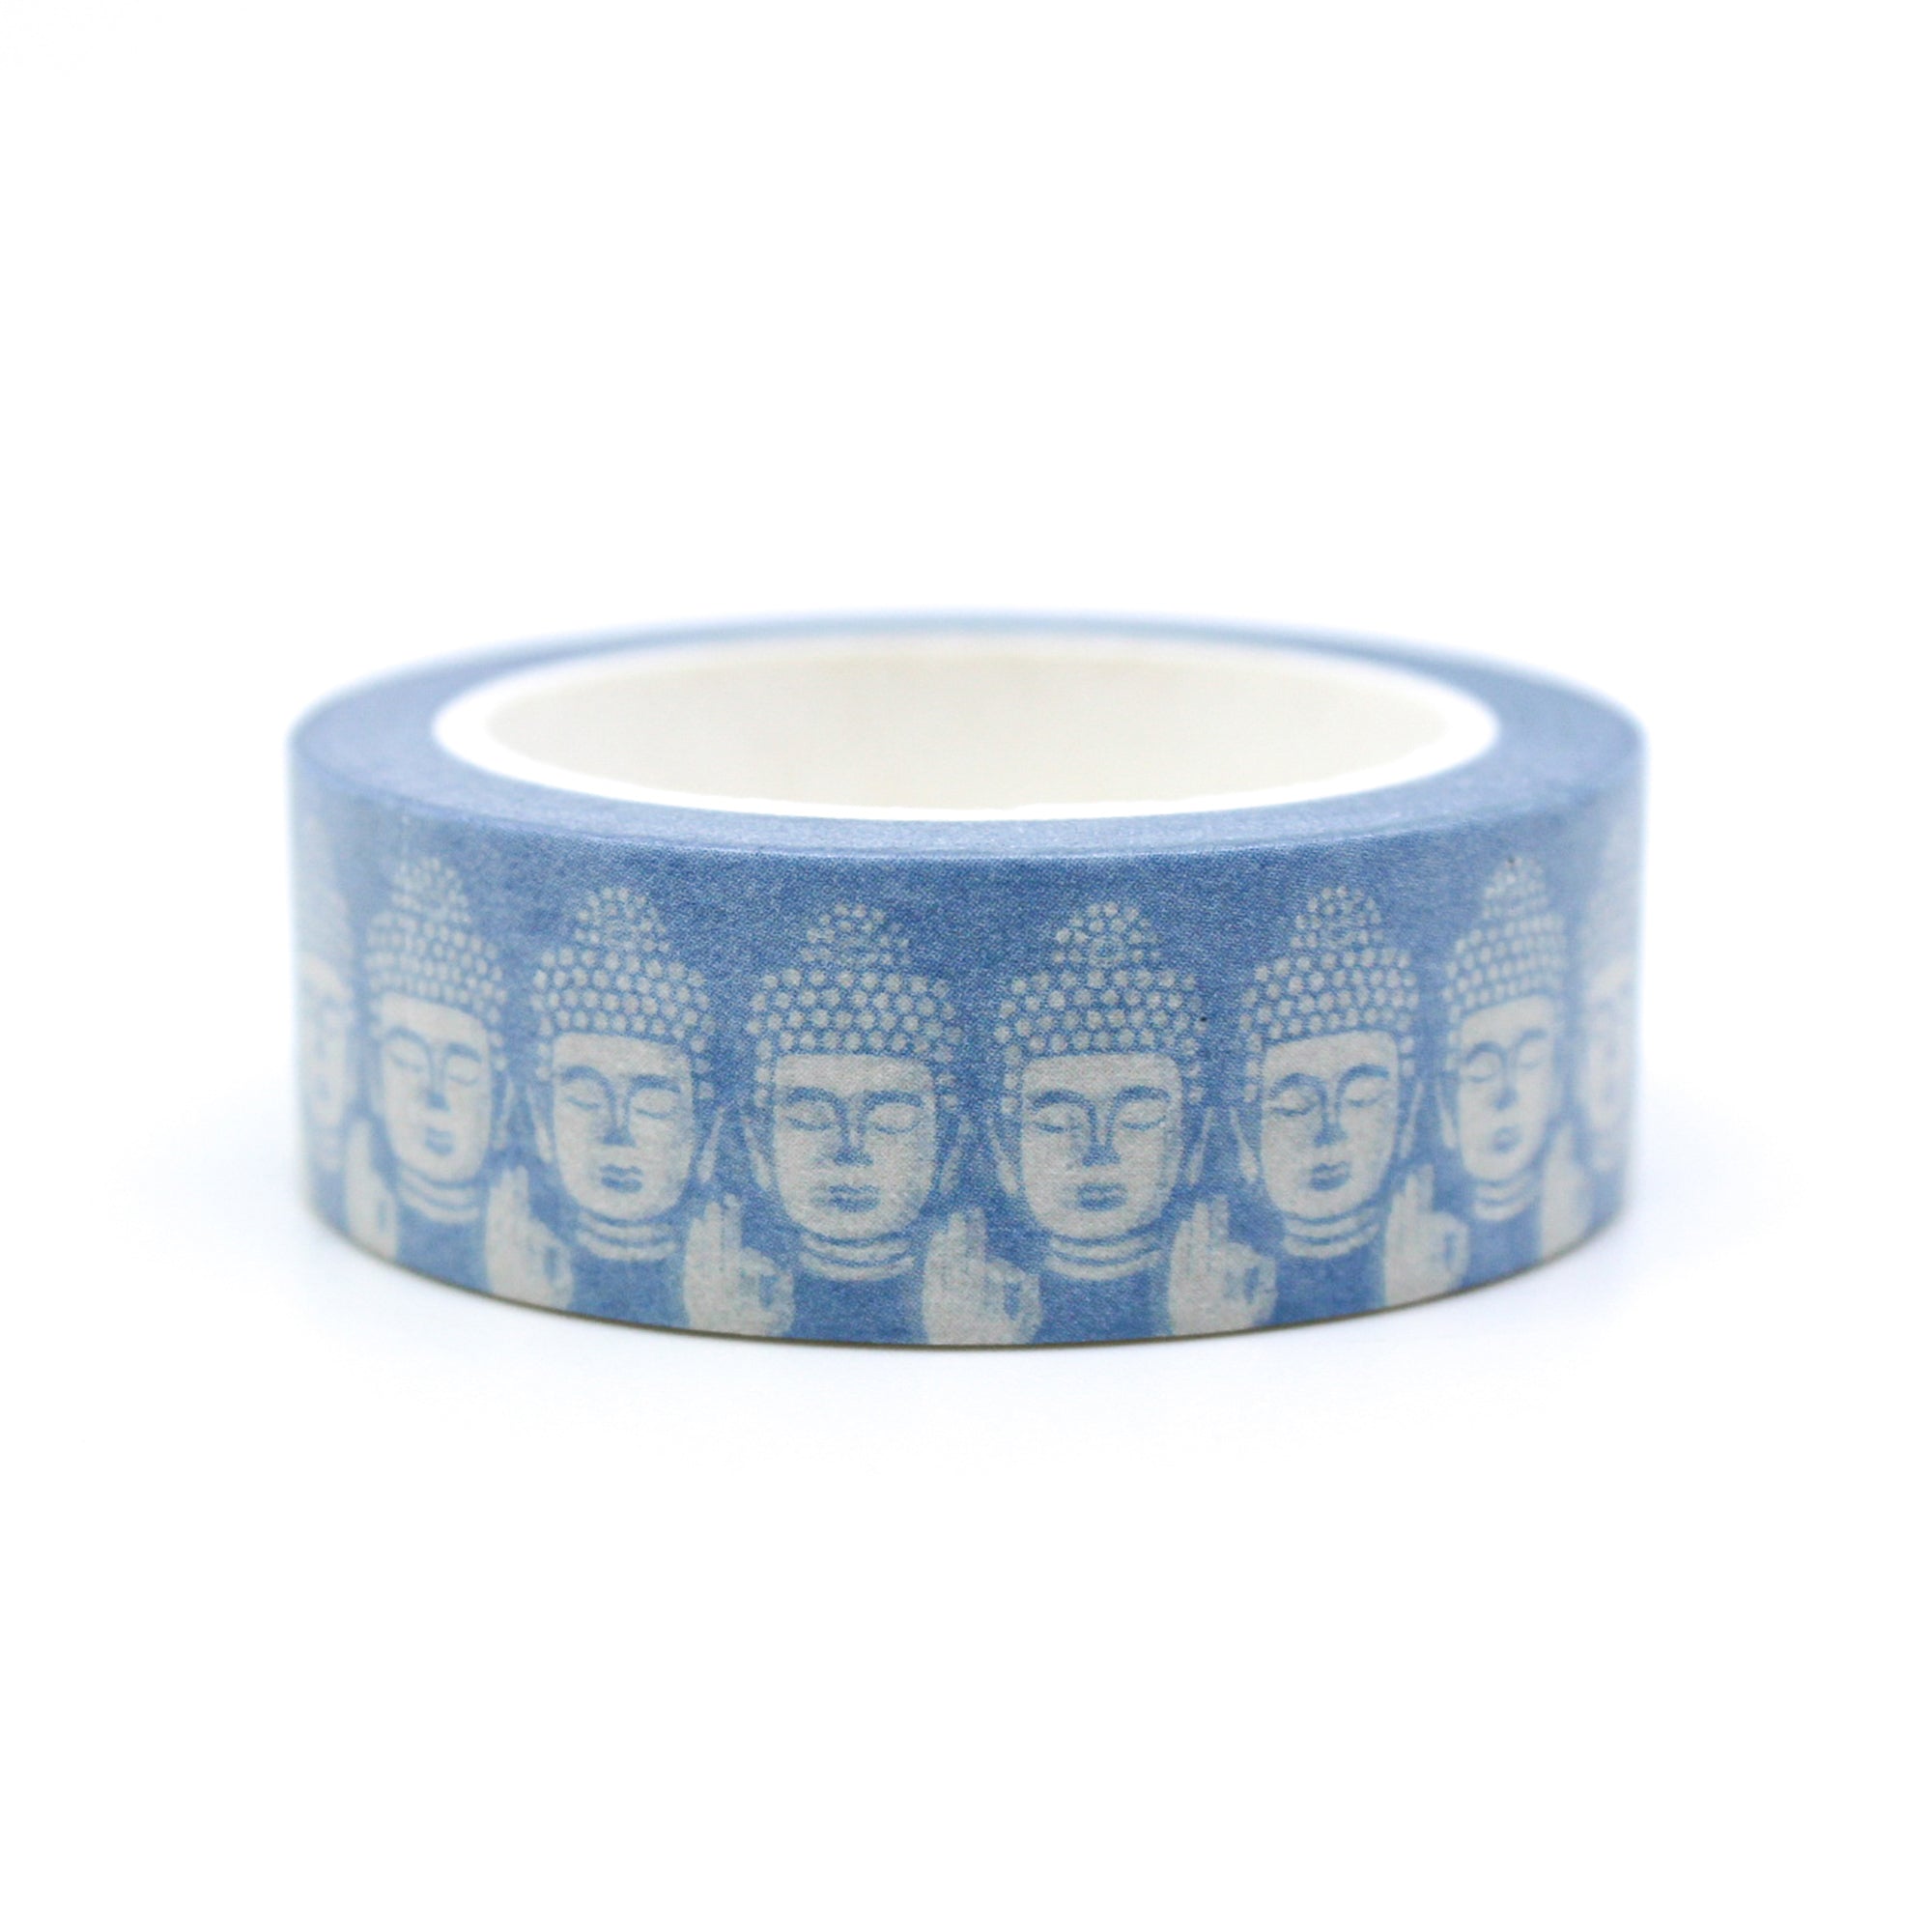 Find inner peace with our 'Be Still' Meditation Washi Tape, adorned with a calming and meditative design. Ideal for adding a touch of serenity and mindfulness to your projects. This tape is from Maylay Co. and sold at BBB Supplies Craft Shop.